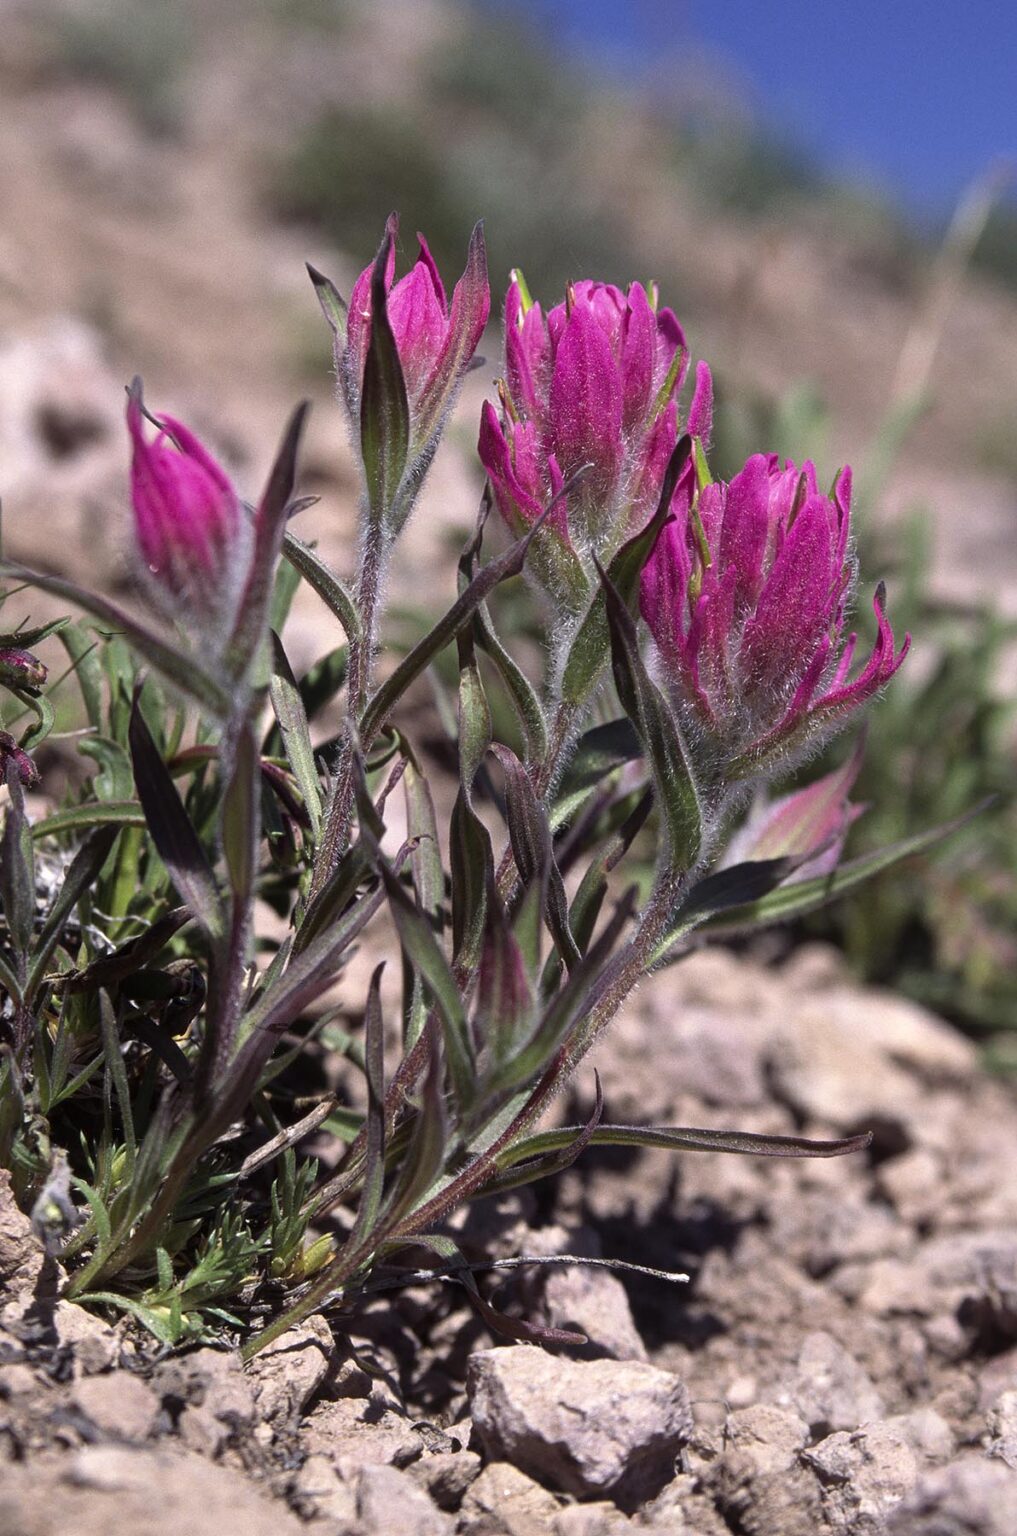 Pink PAINTBRUSH grows at 12,000 ft in the RIO GRANDE NTNL FRST - COLORADO ROCKIES